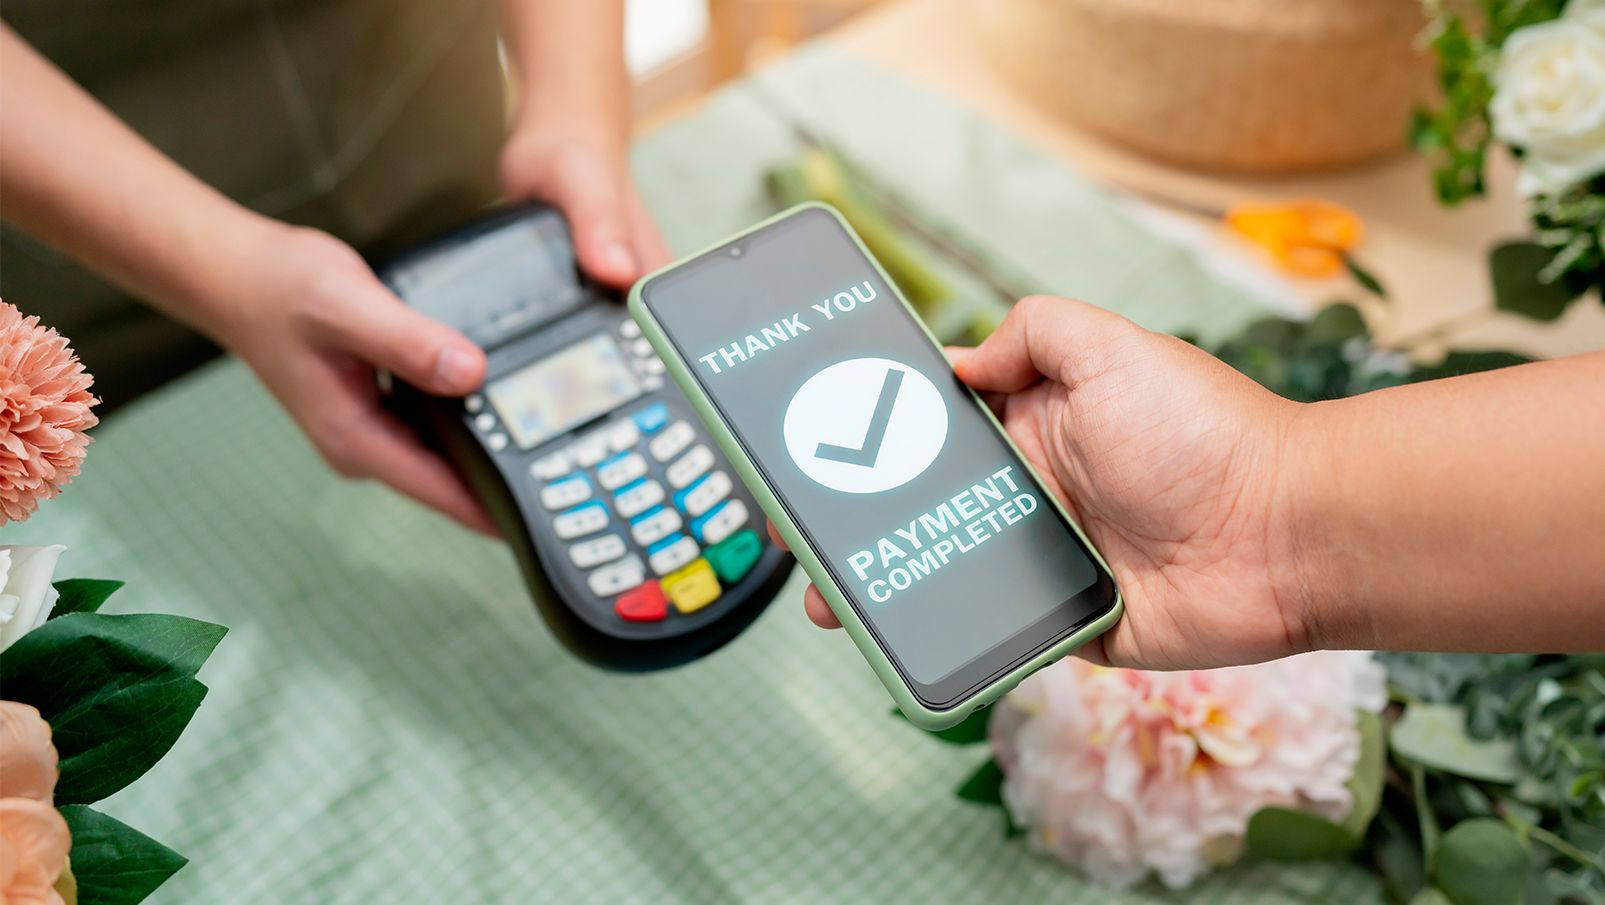 Who Provides Mobile Payments?